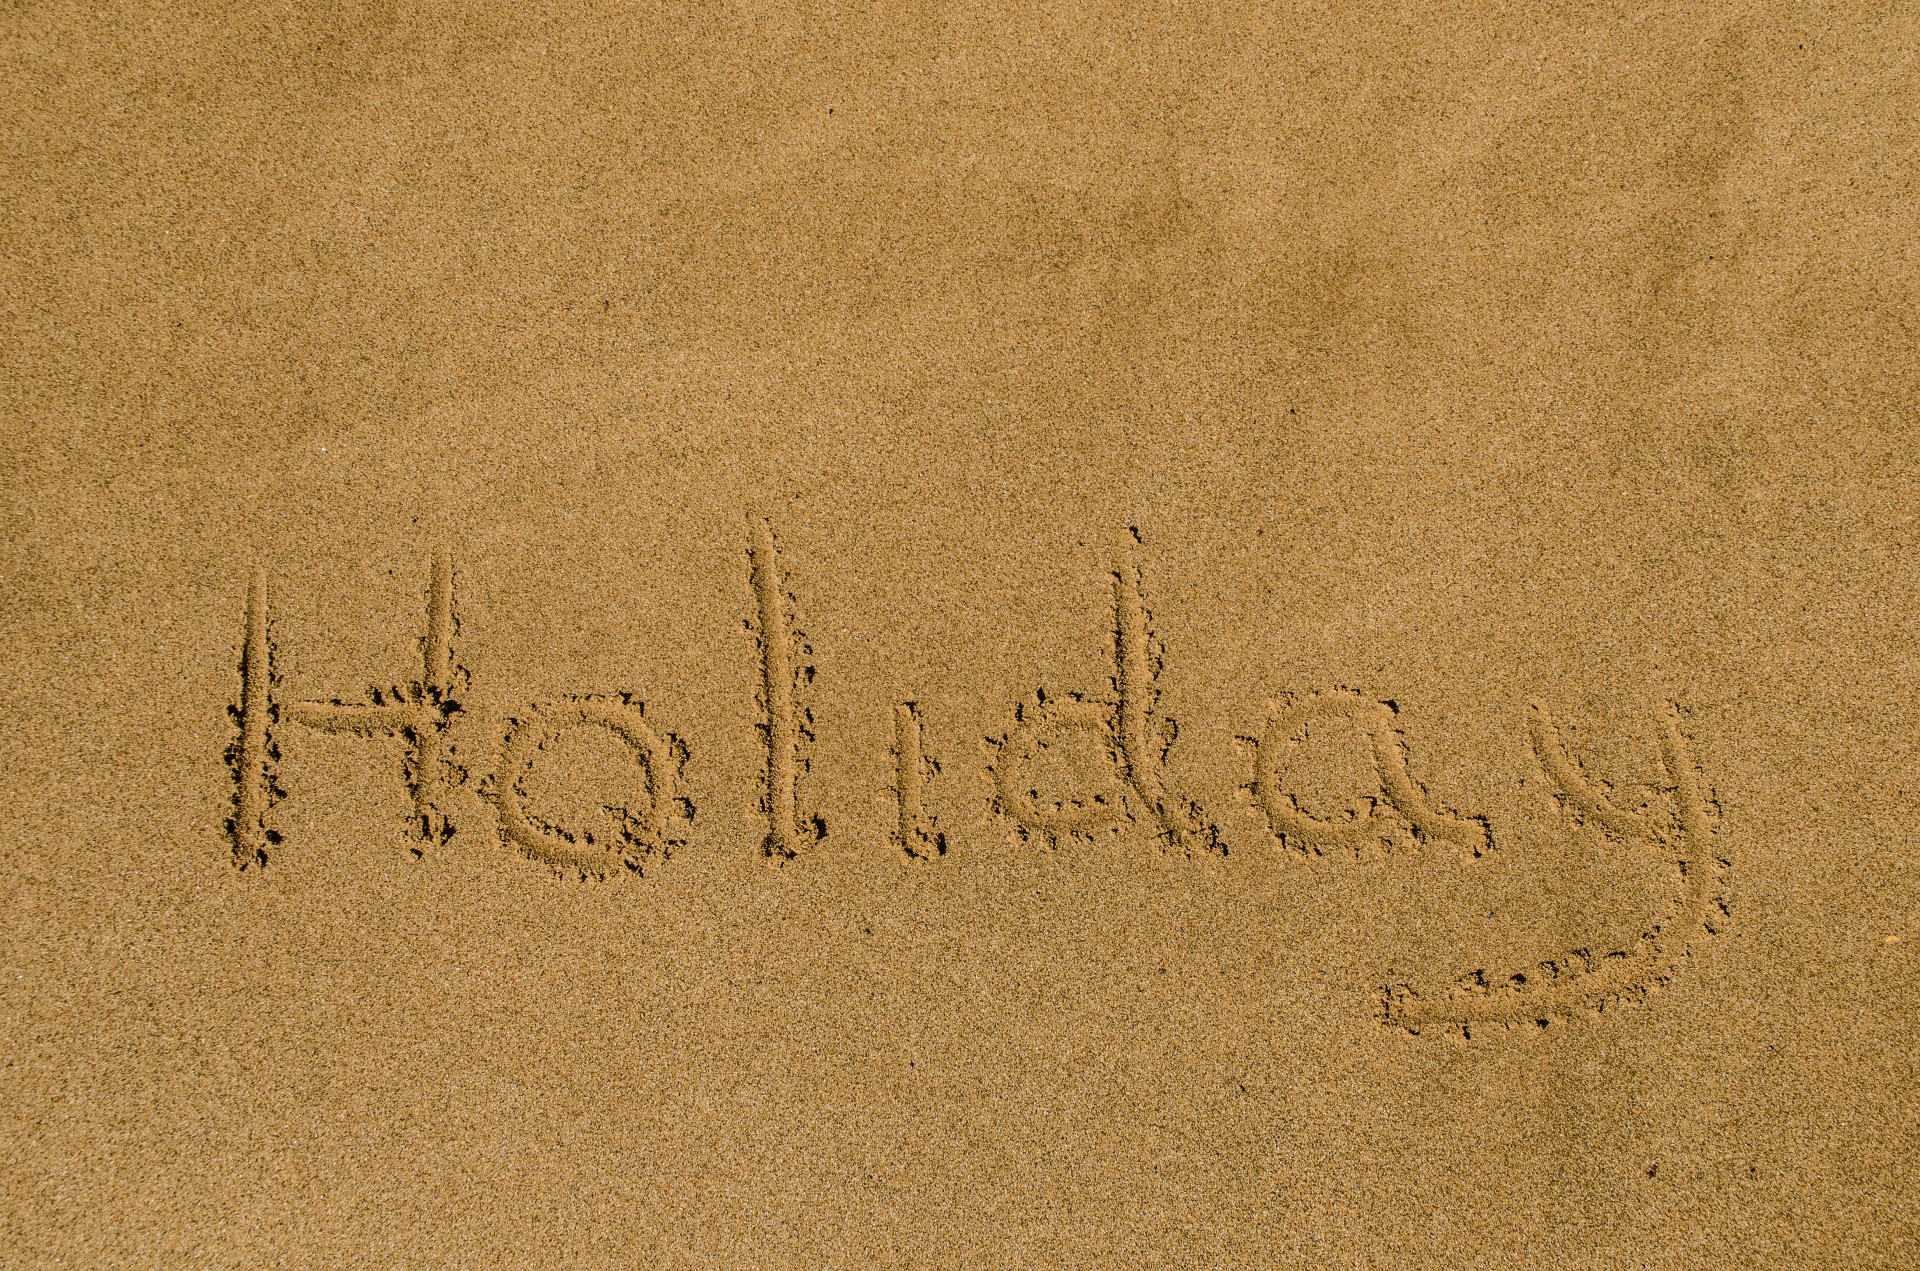 "Holiday" Written In The Sand